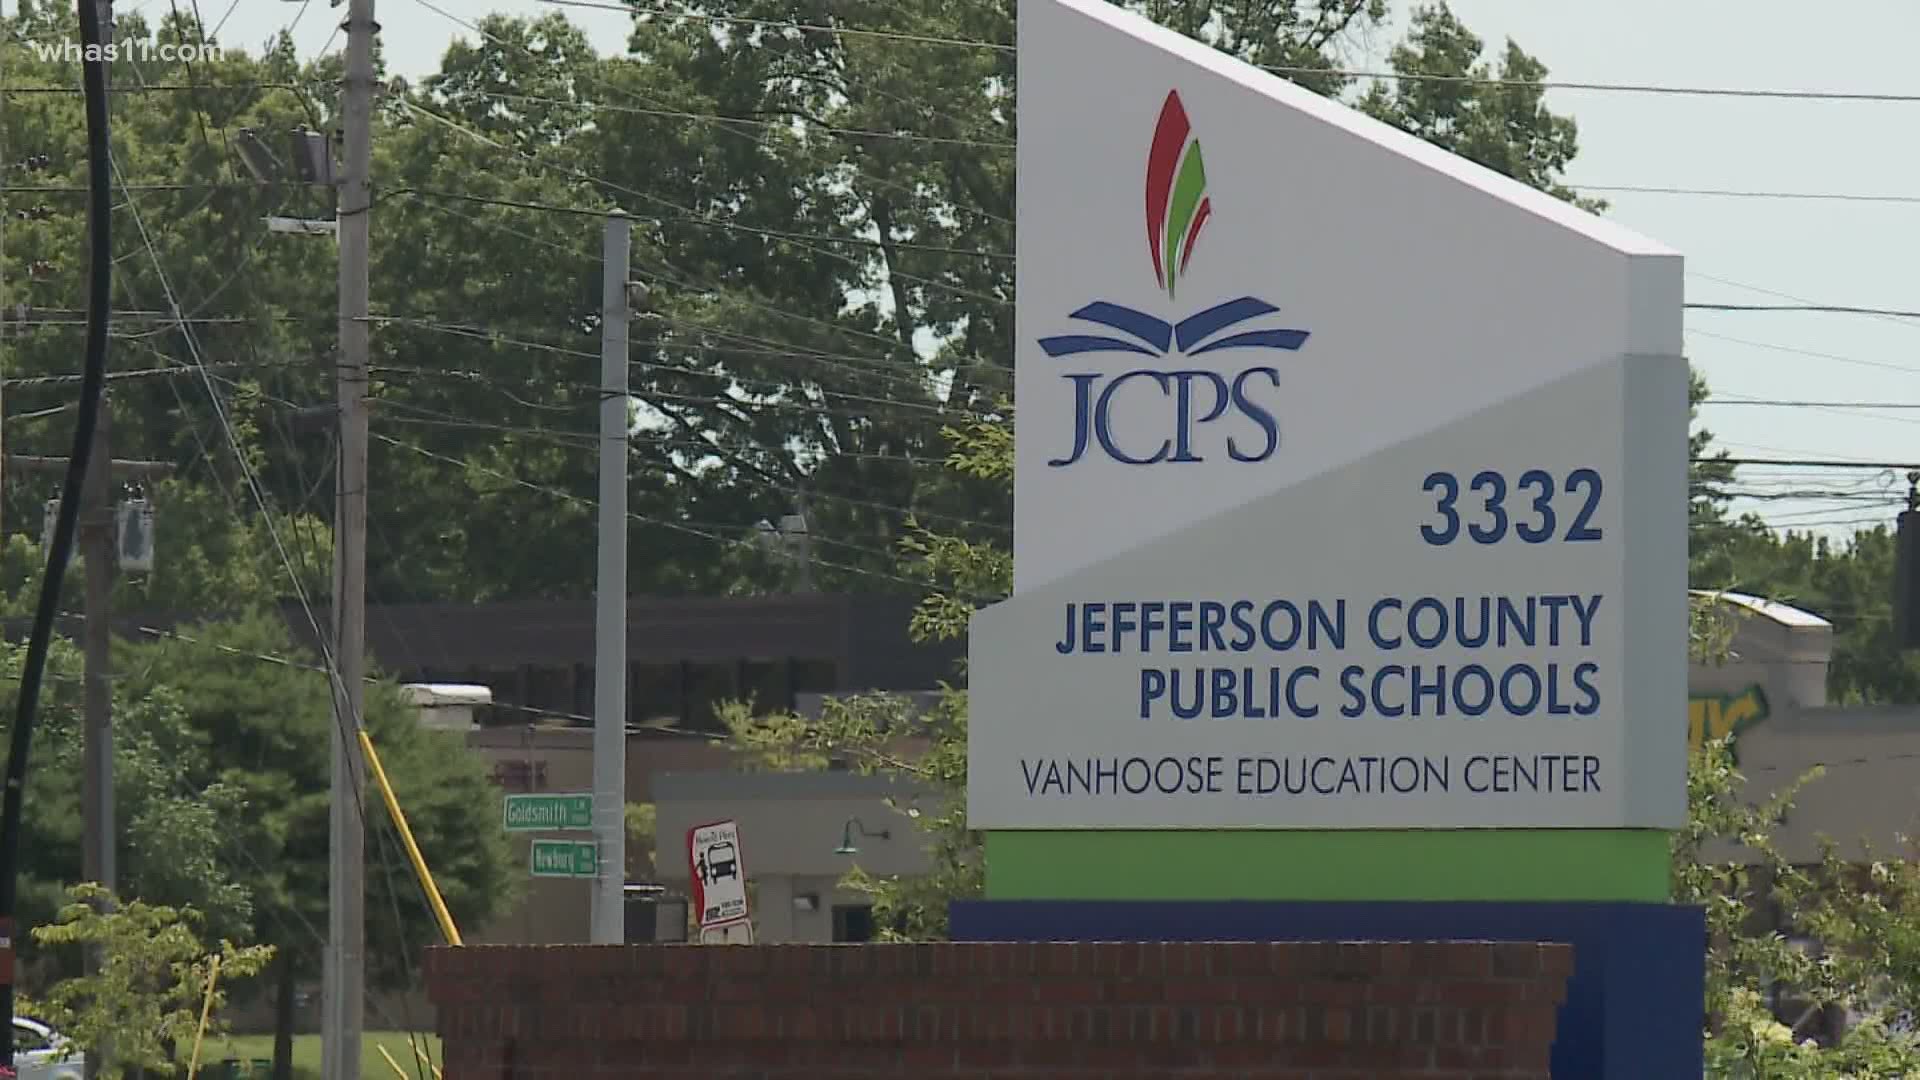 The scholarship program through JCPS is accepting 60 applications for scholarships worth up to $2,000.